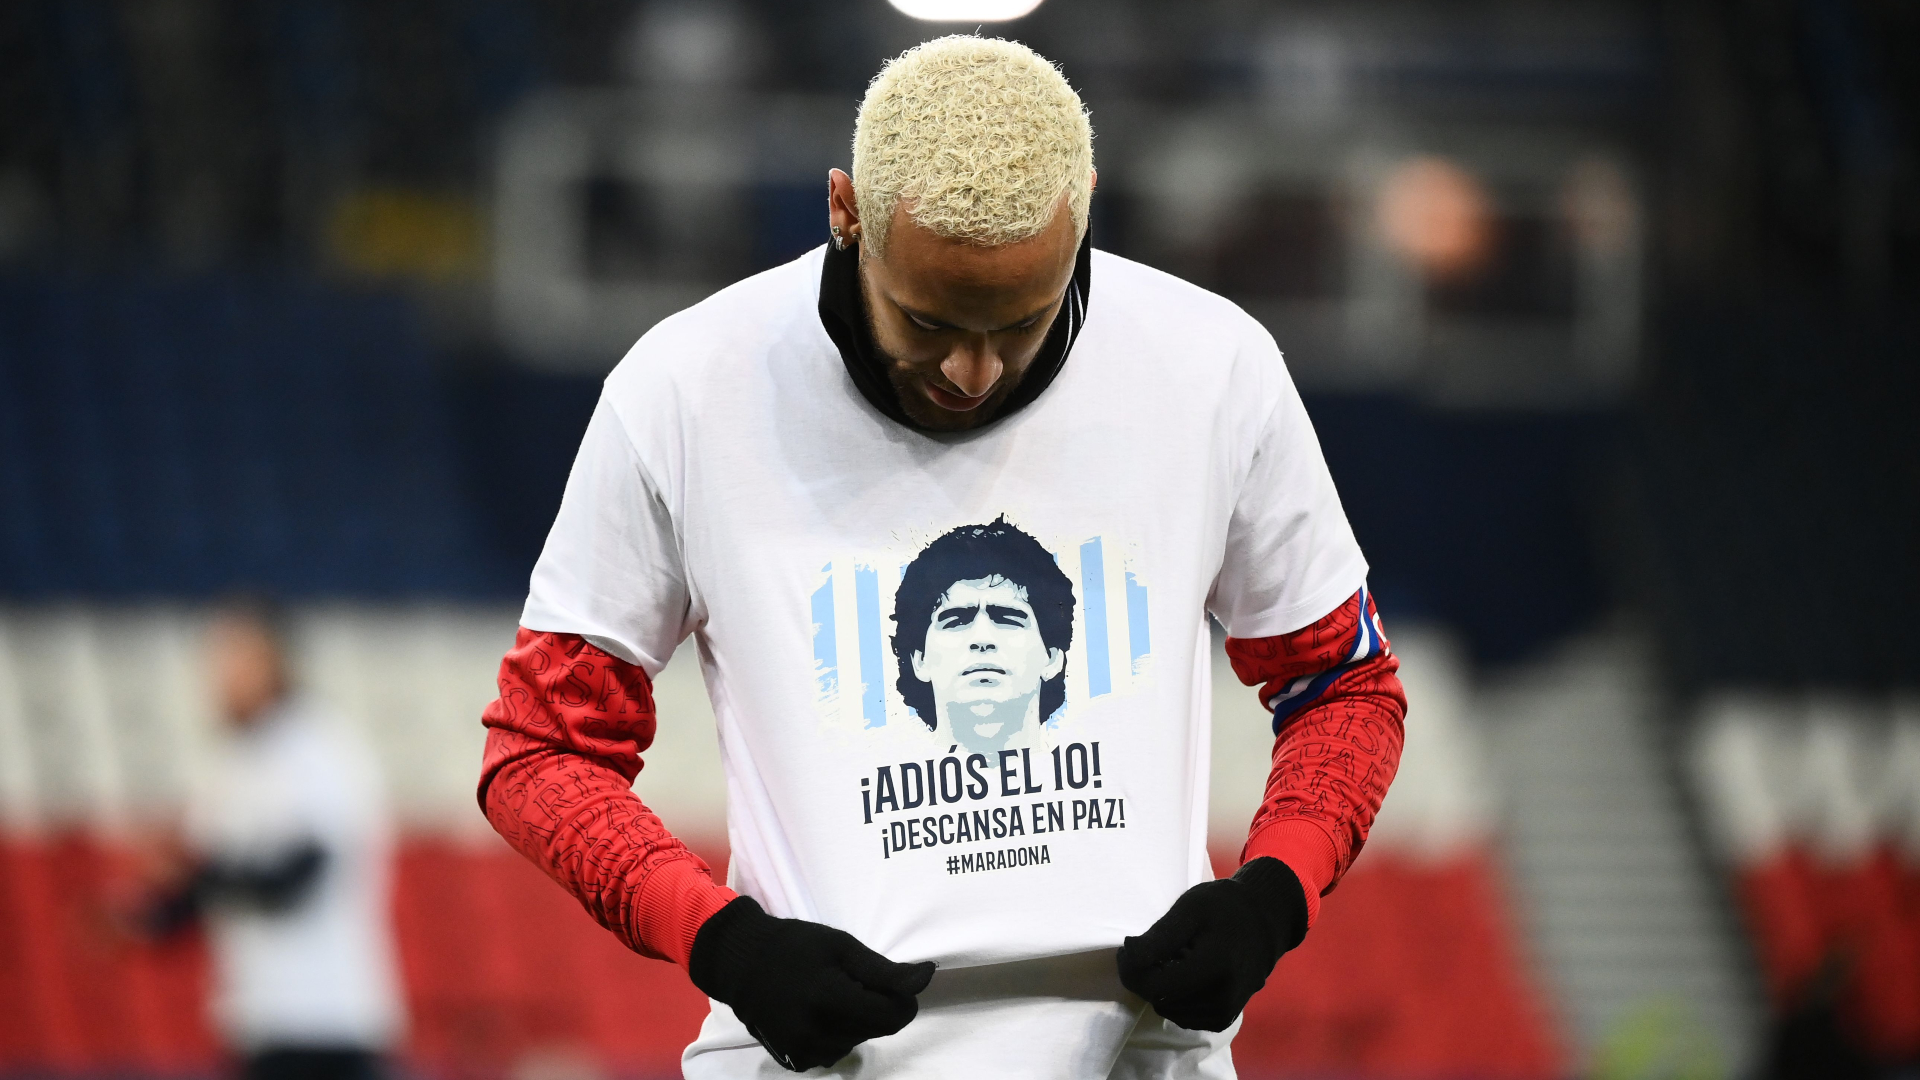 'I'll never forget his gesture' - Neymar opens up on meeting Maradona